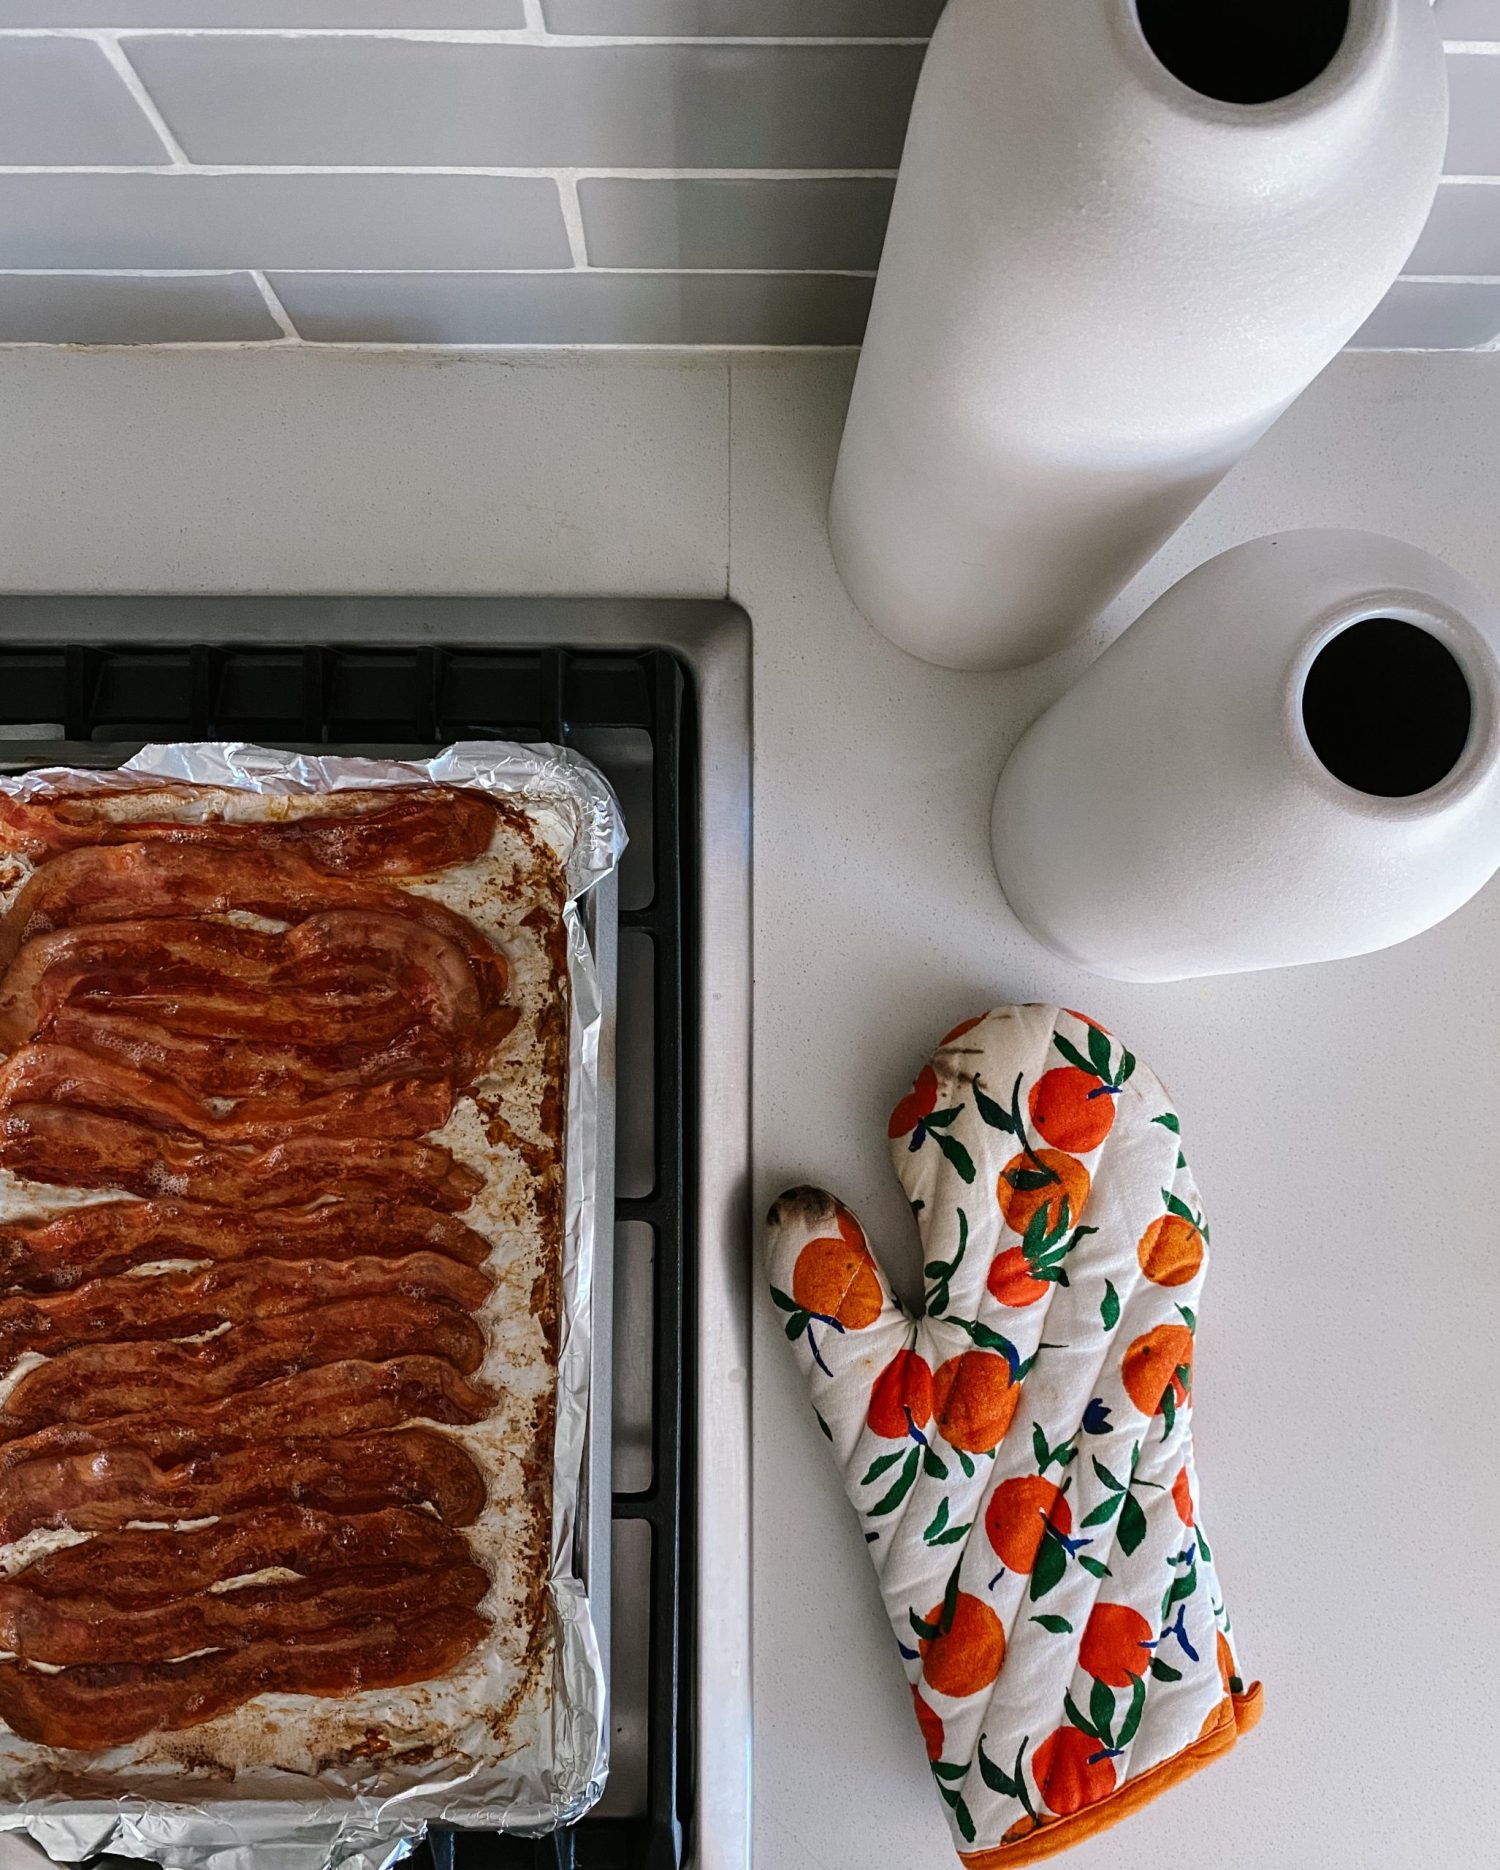 Cooking bacon in the oven makes the perfect crispy bacon! It is less messy than cooking on the stovetop, and allows you to multitask, preparing other ingredients needed for your meal.